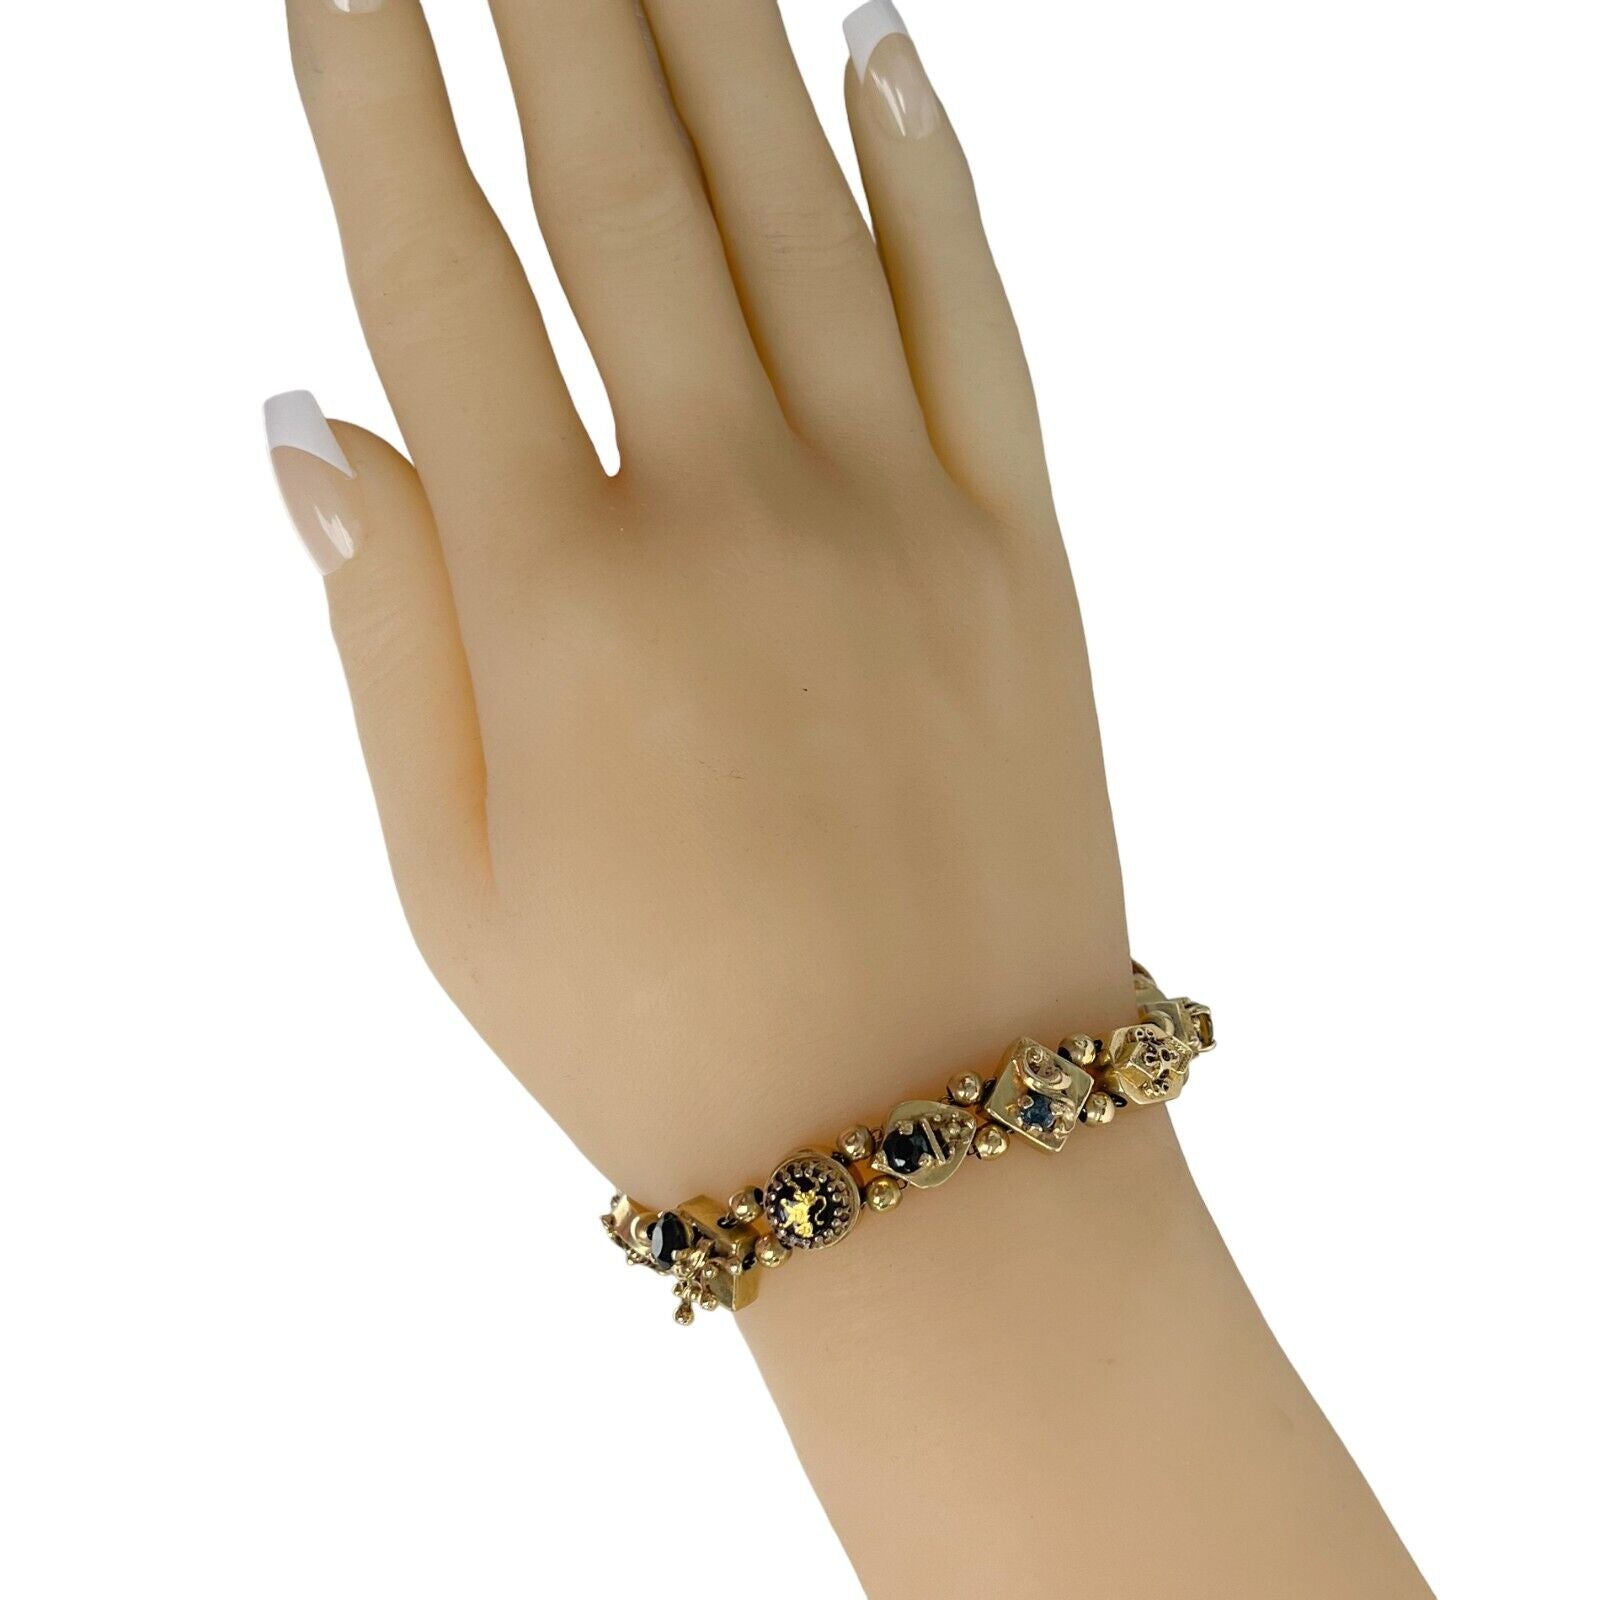 Faceted Onyx and Tiger's Eye Bracelet with Lion's Head Charm – Ouen อ้วน  Designs